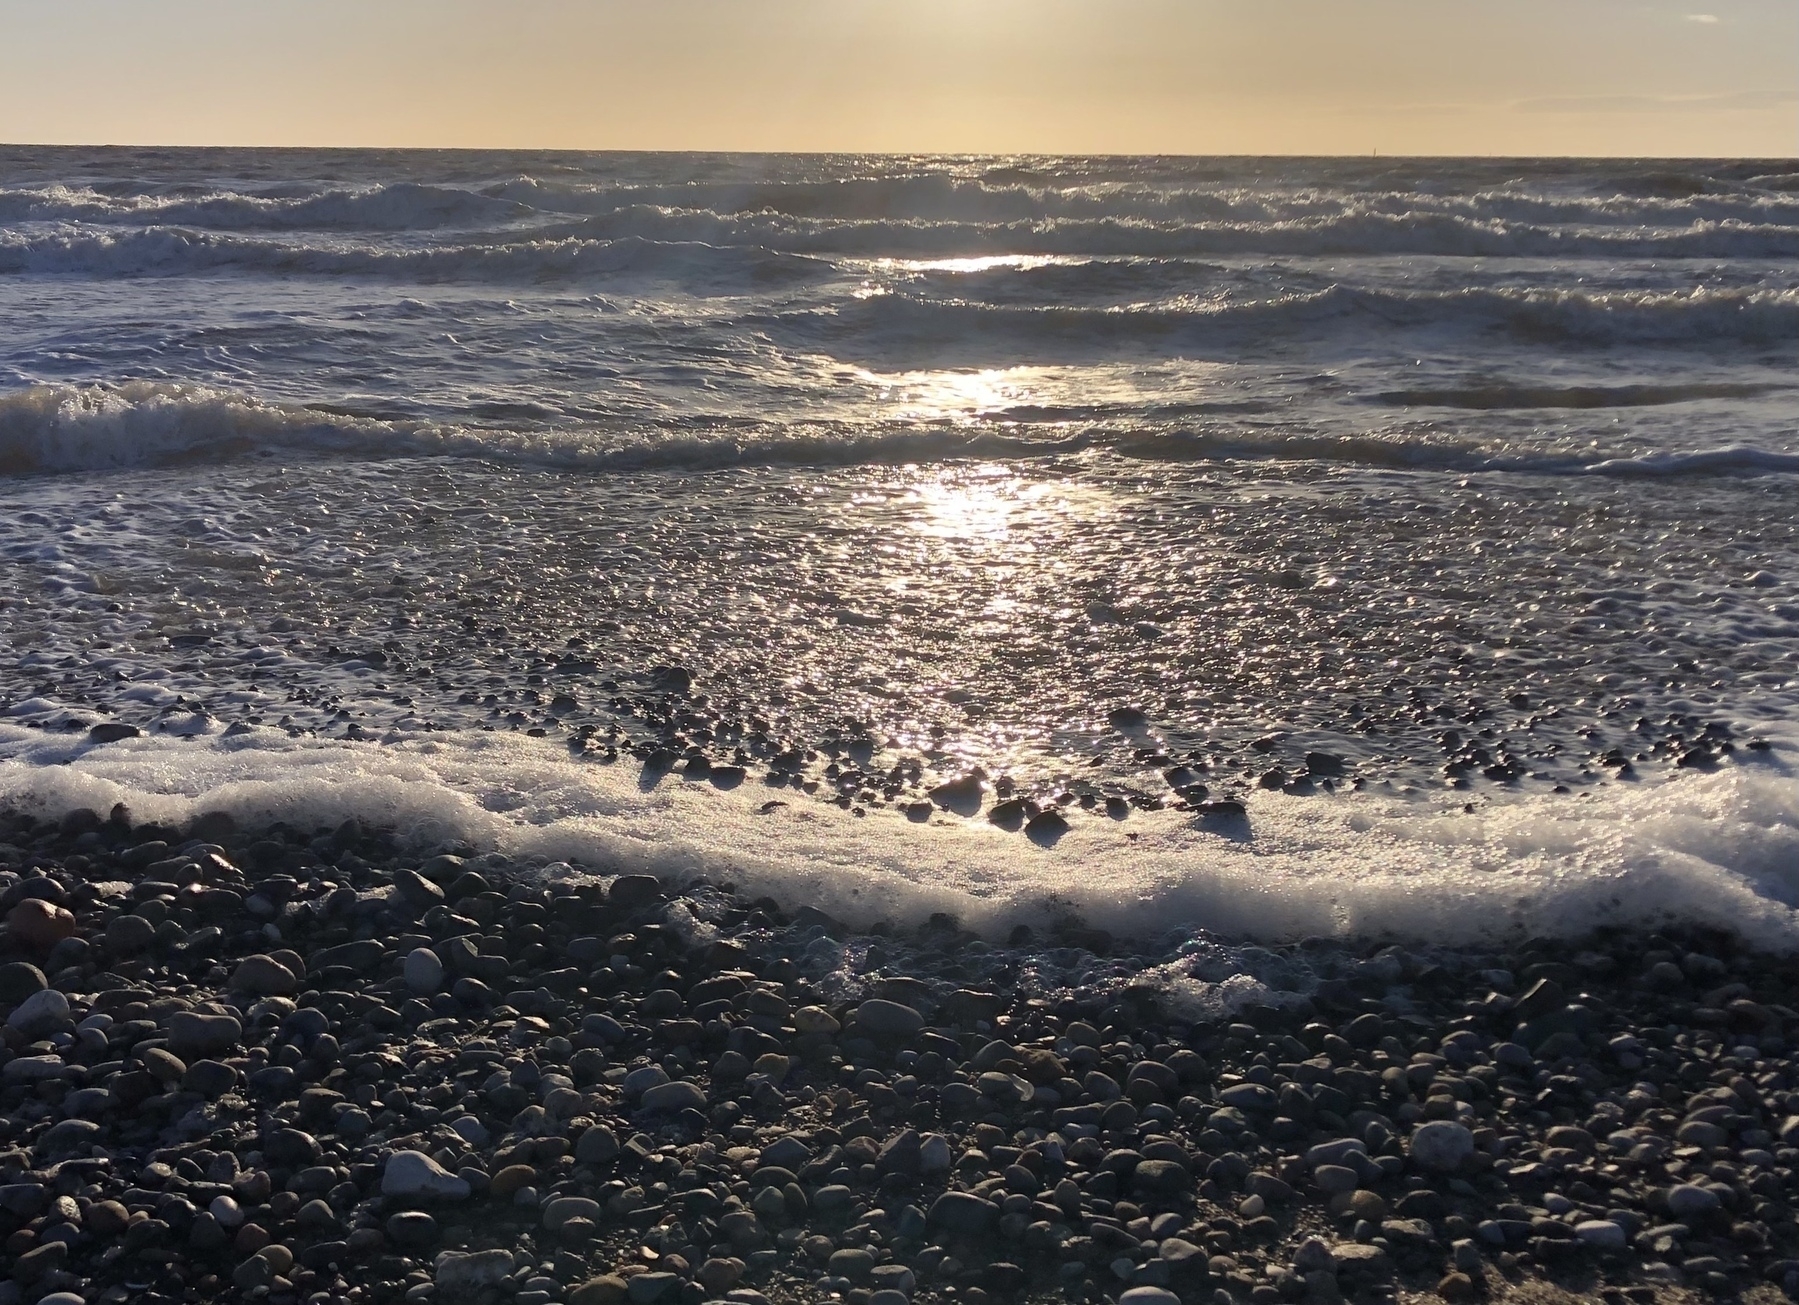 Pebbled seashore and foamy waves in the evening sun